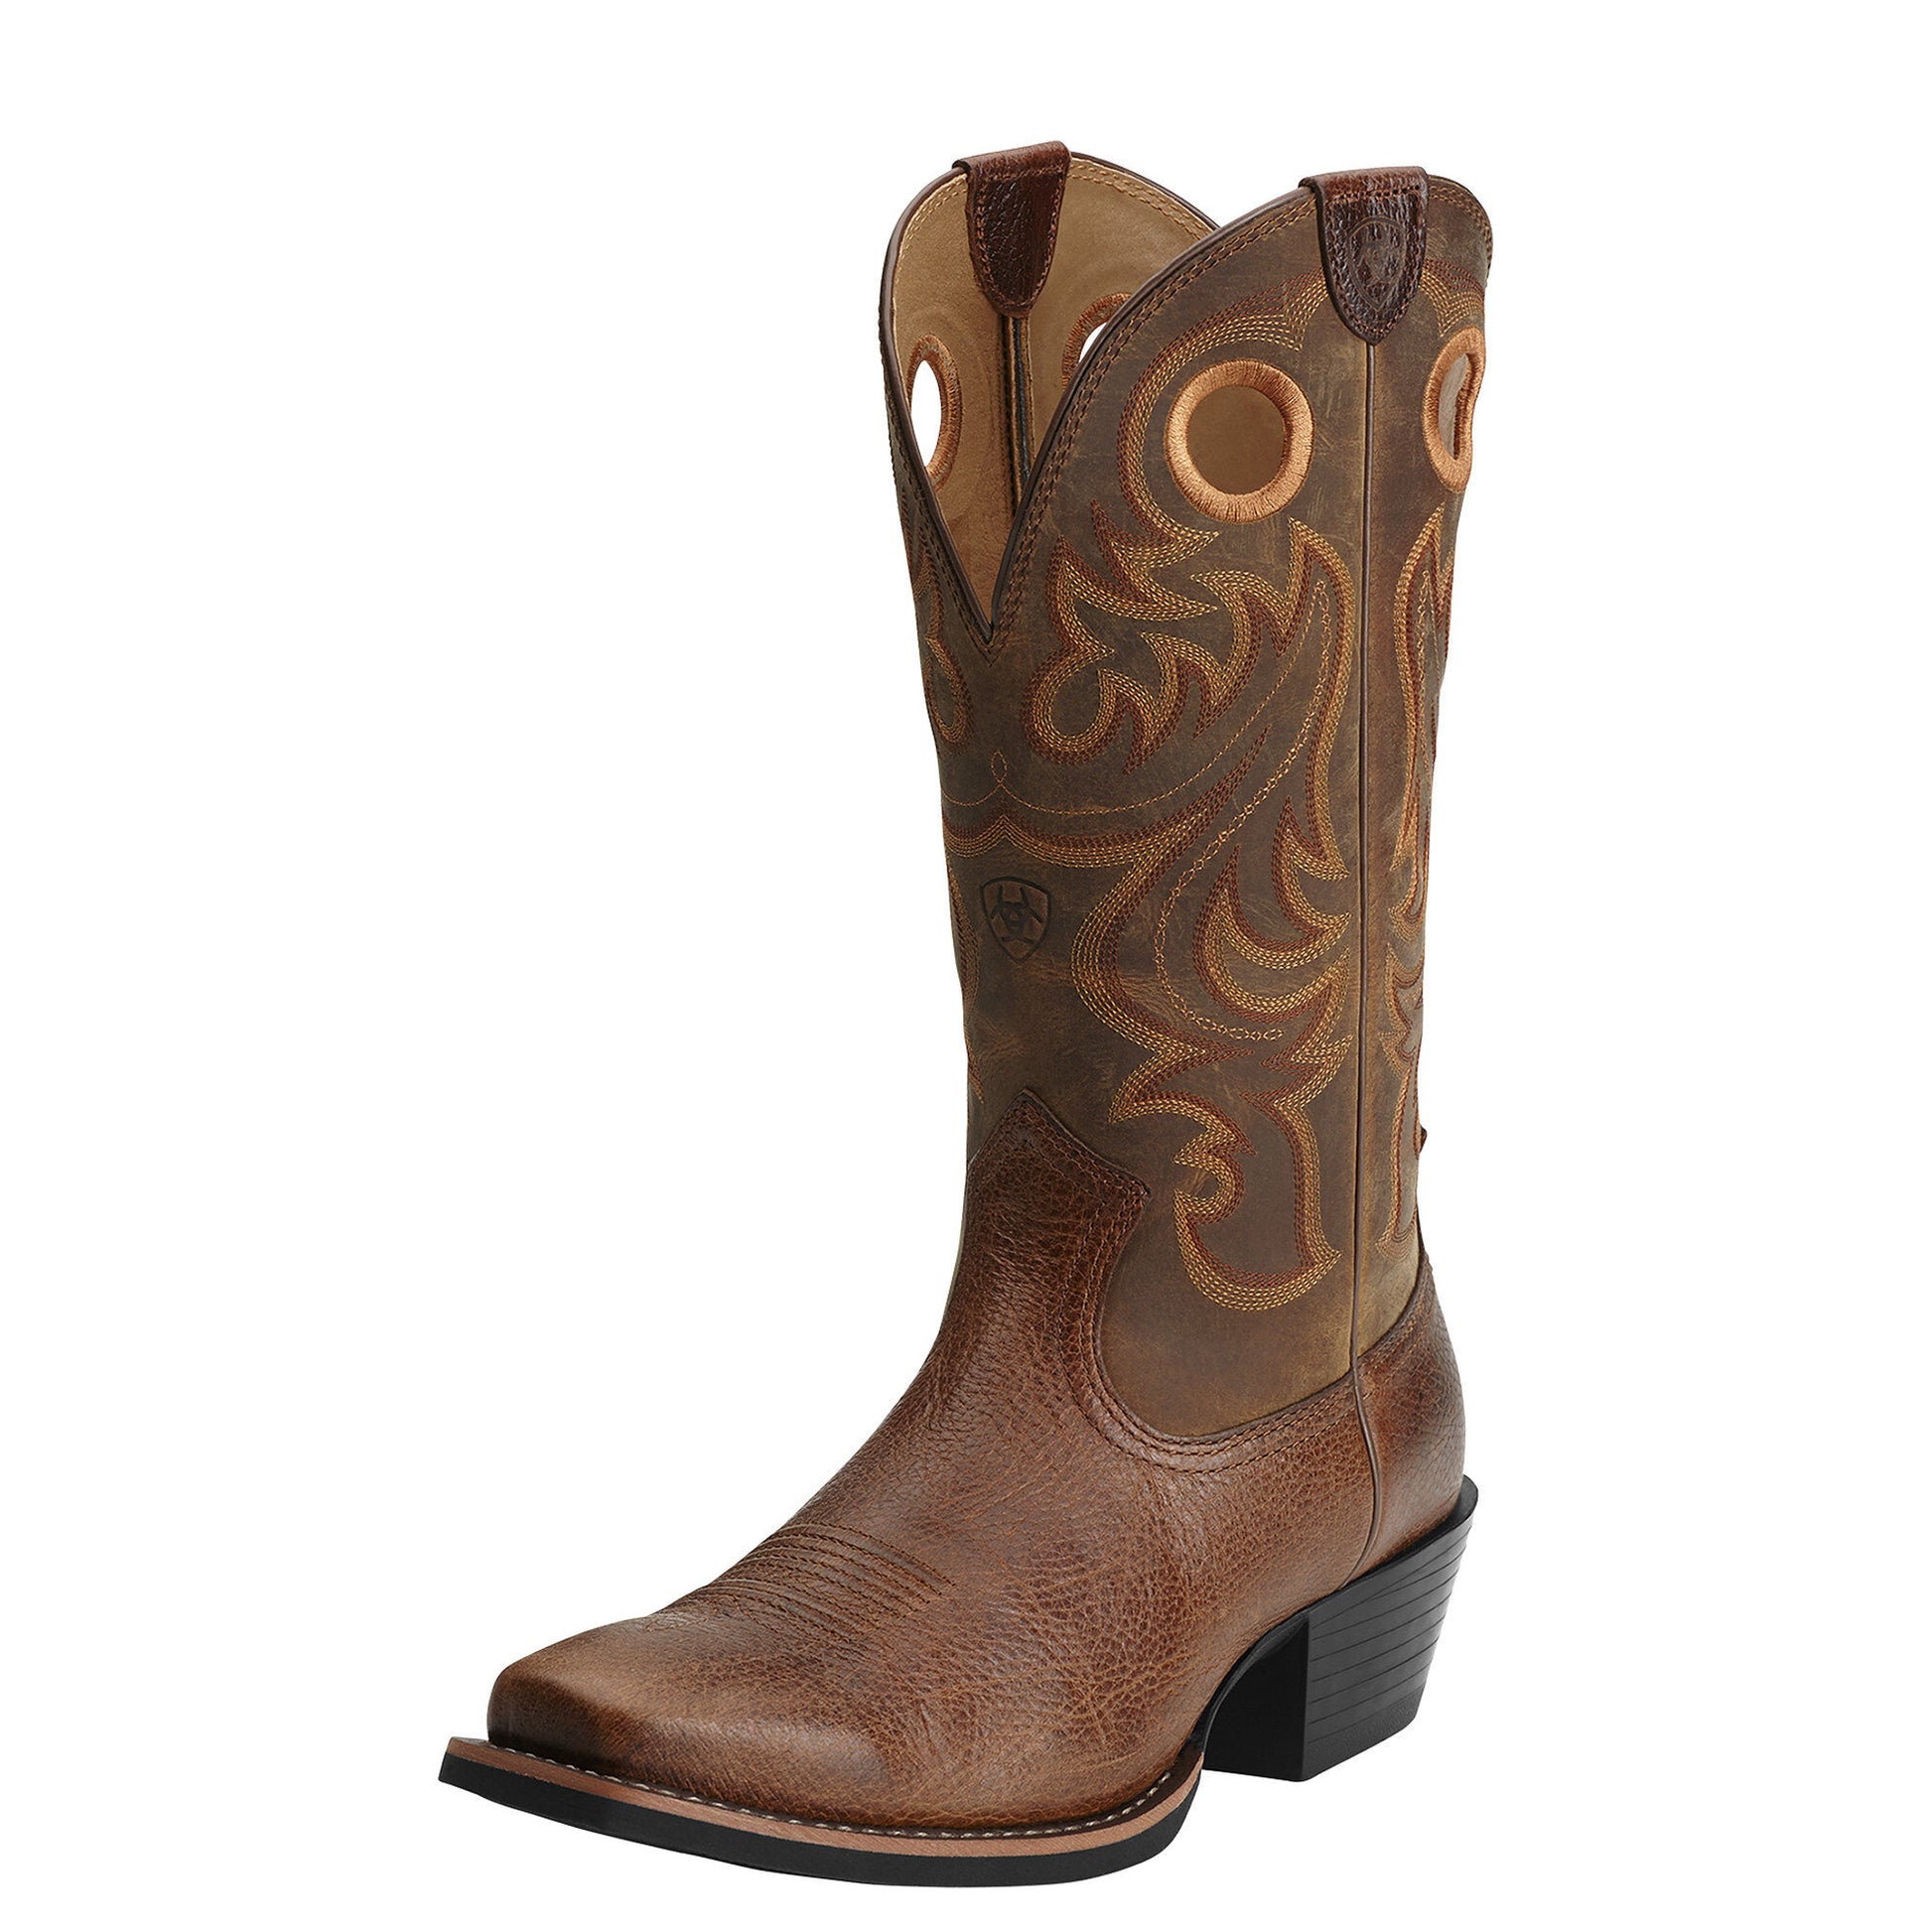 Ariat Men's Sport Square Toe Boot - Fiddle Brown - French's Boots